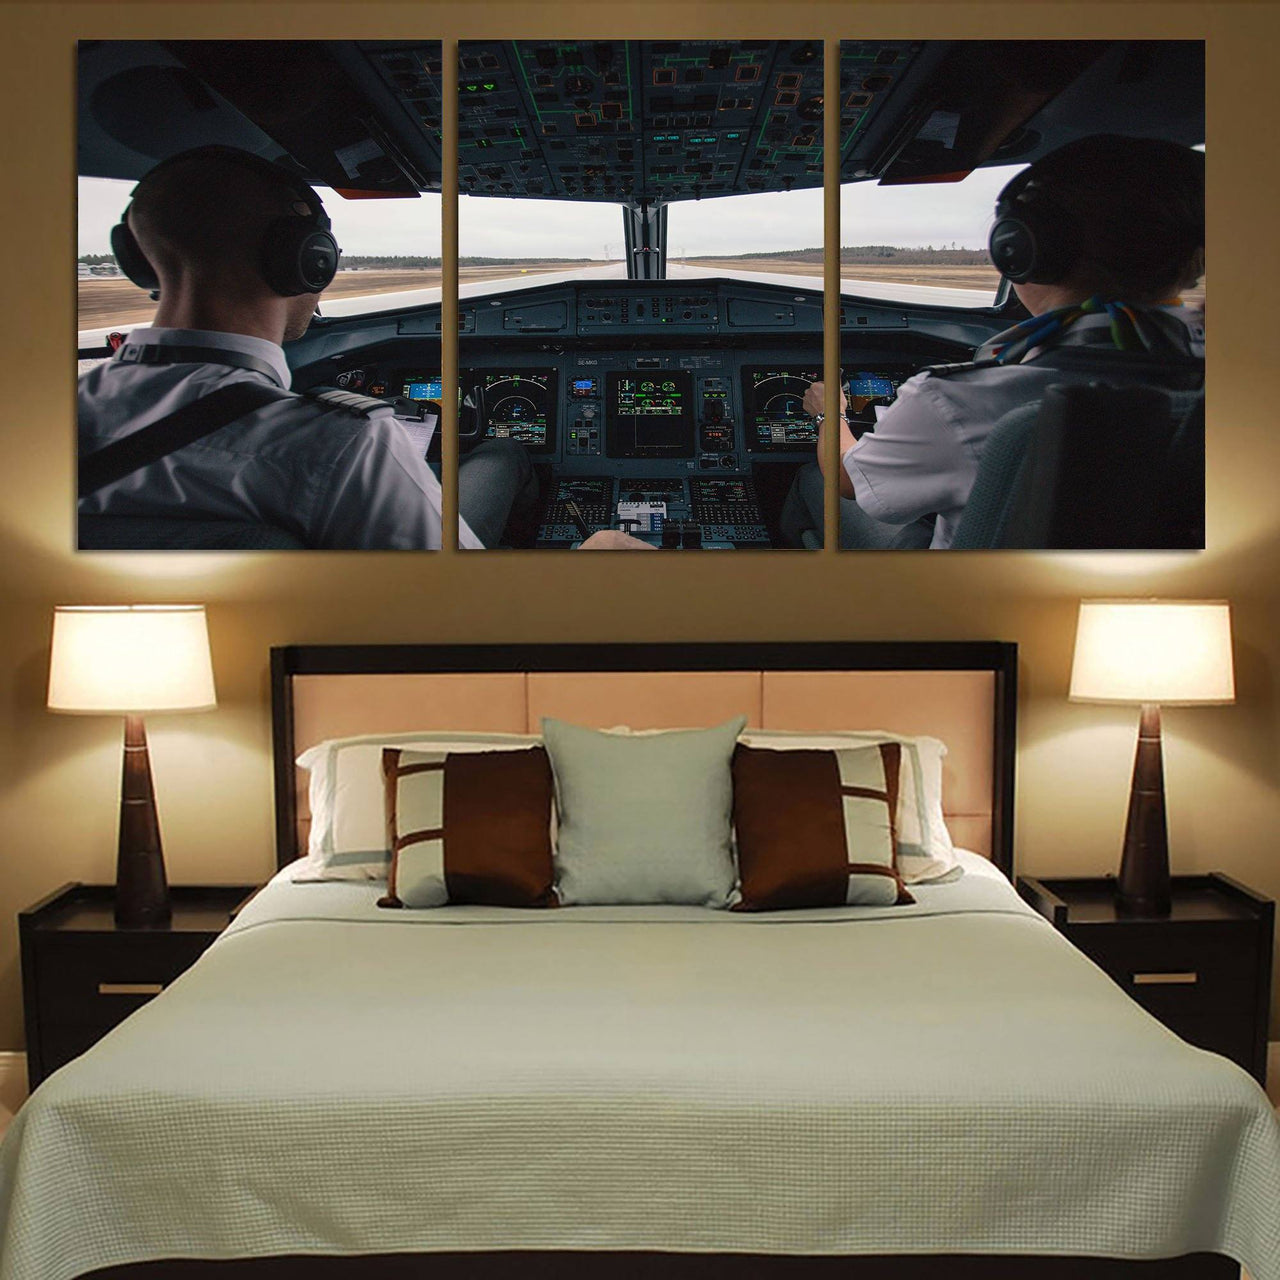 Departing Aircraft's Cockpit Printed Canvas Posters (3 Pieces) Aviation Shop 